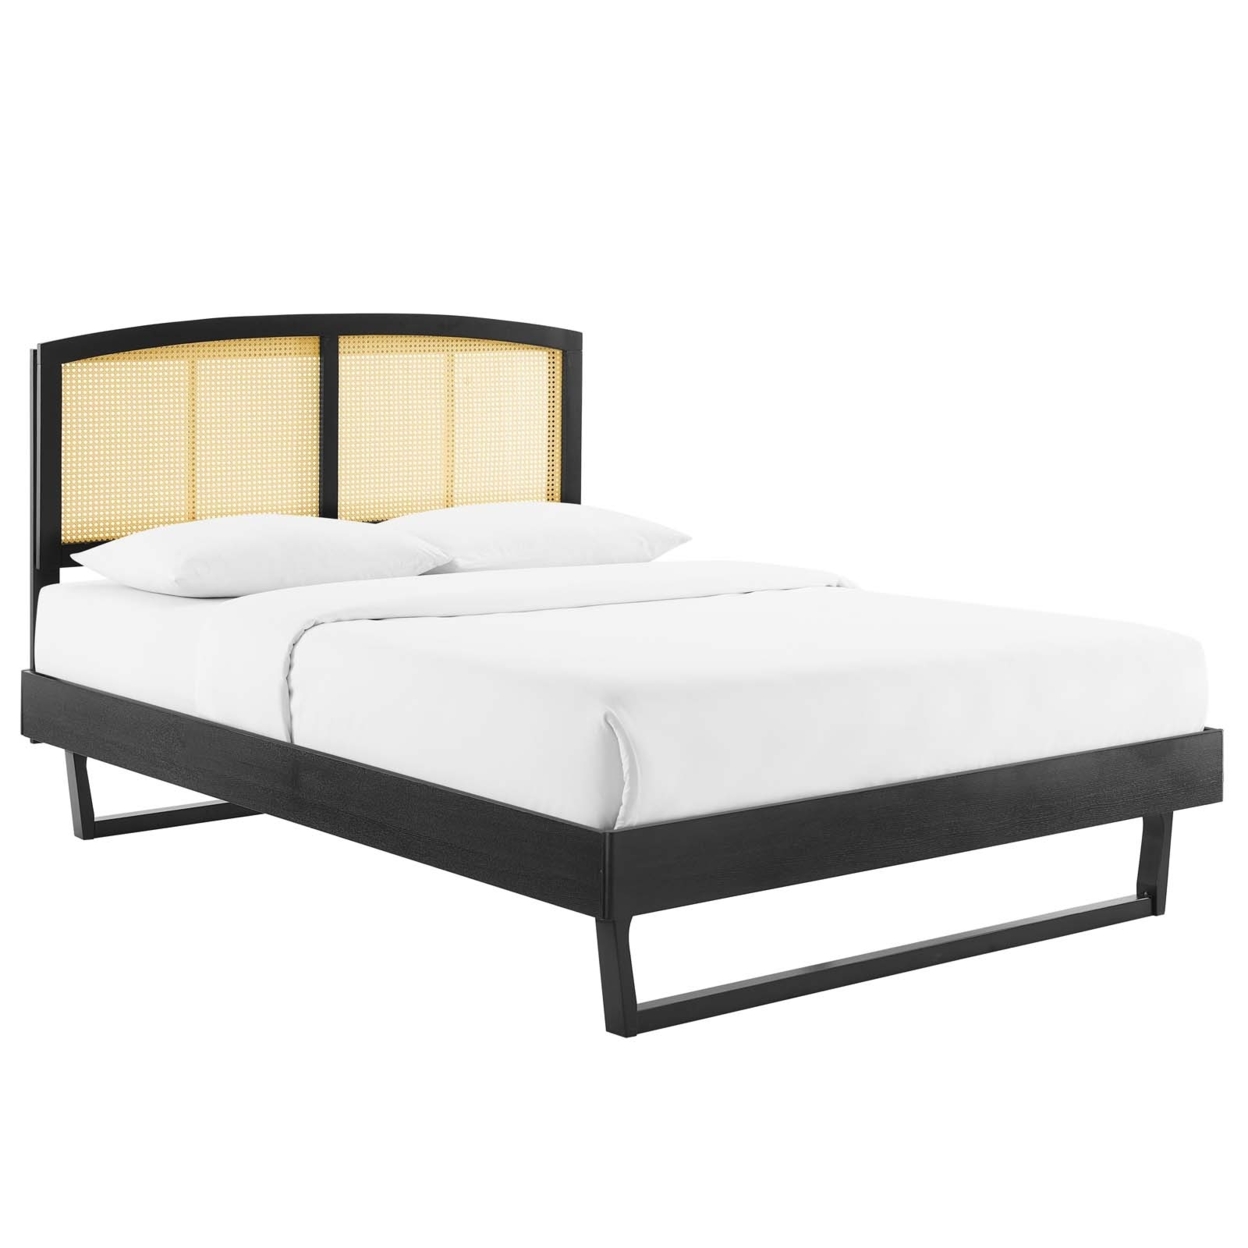 Sierra Cane And Wood King Platform Bed With Angular Legs, Black